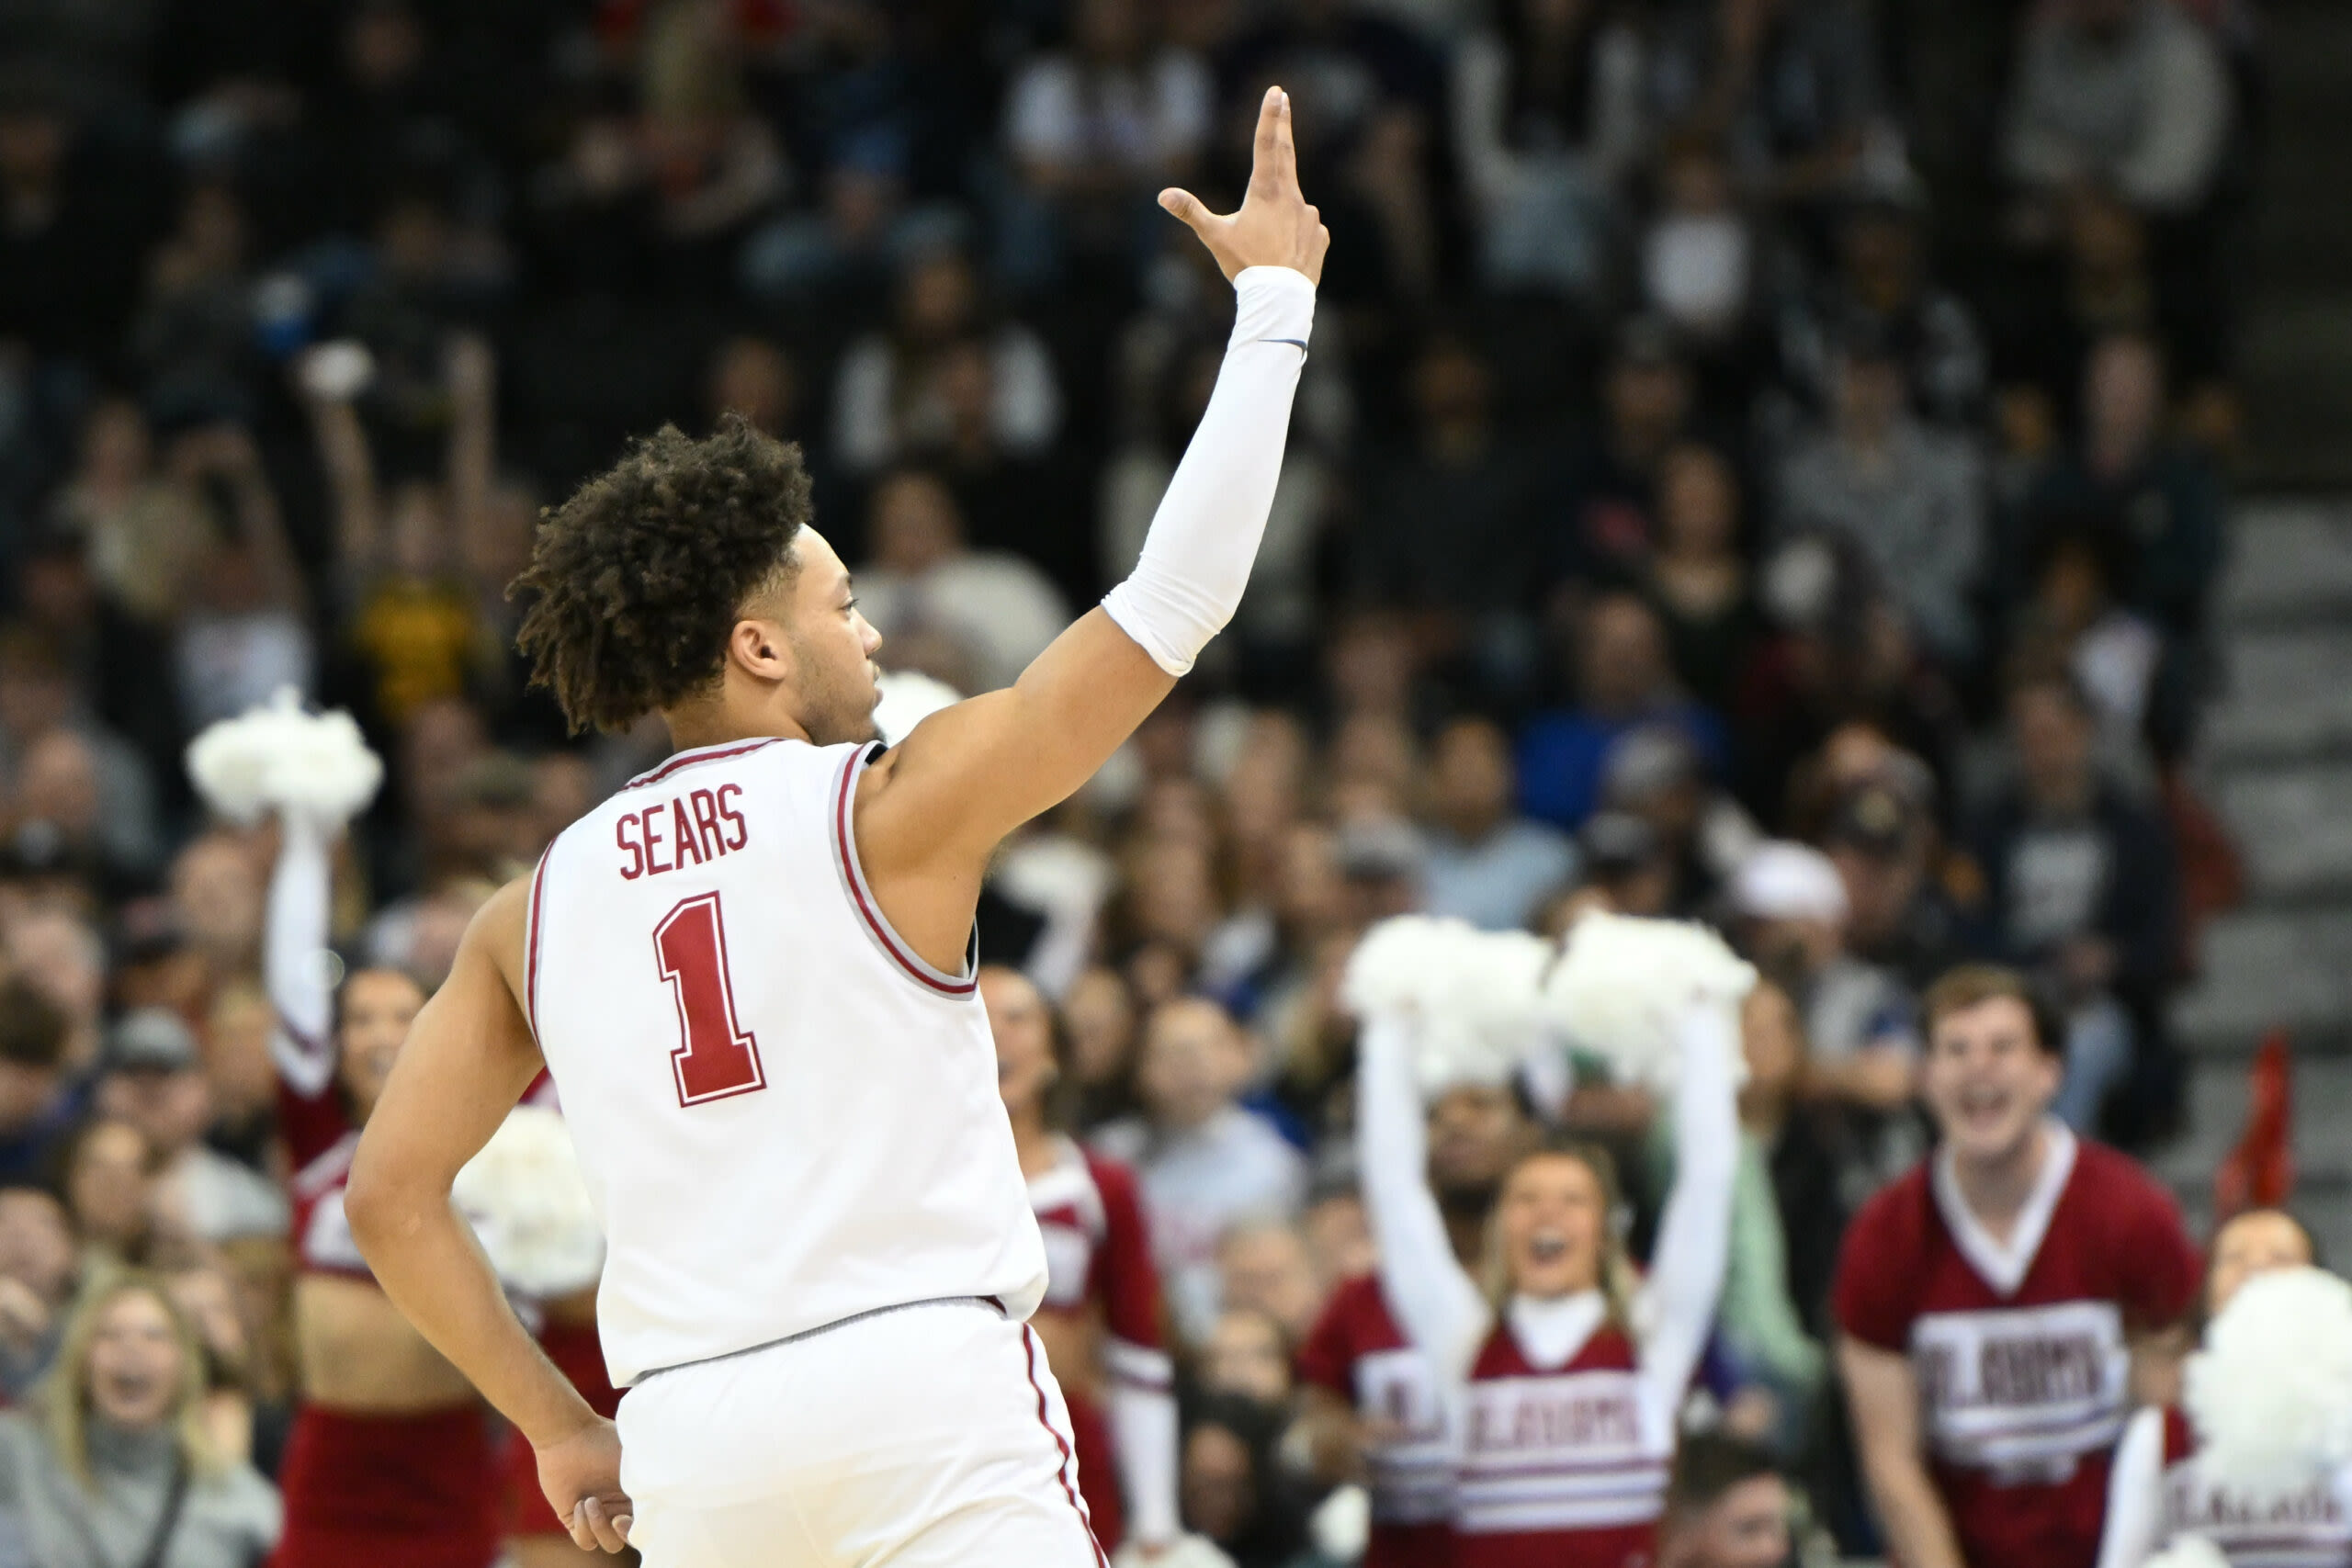 Alabama basketball is projected to be the No. 1 team in the nation